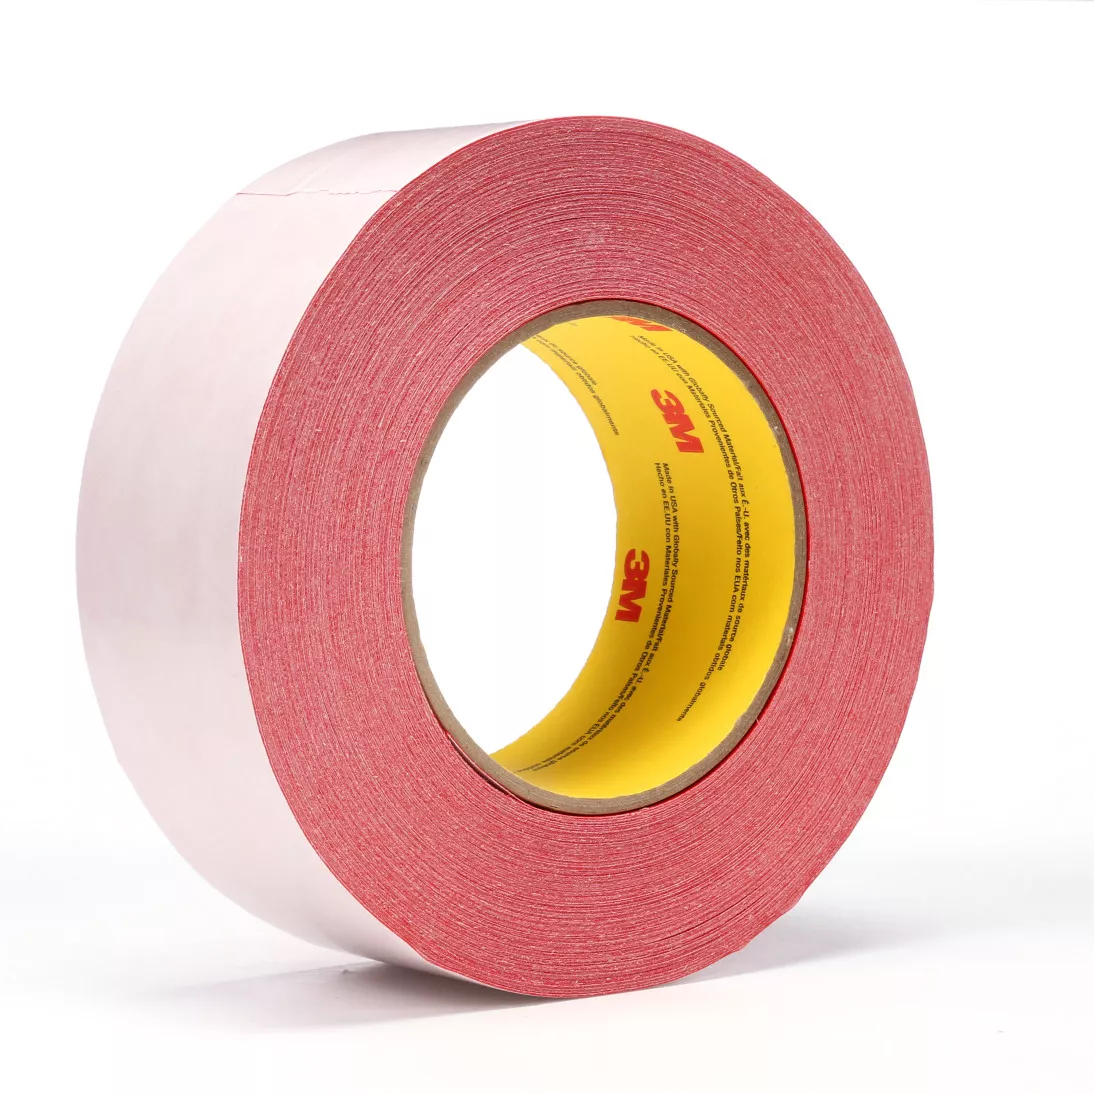 3M™ Double Coated Tape 9737R, Red, 48 mm x 55 m, 3.5 mil, 24 rolls per
case